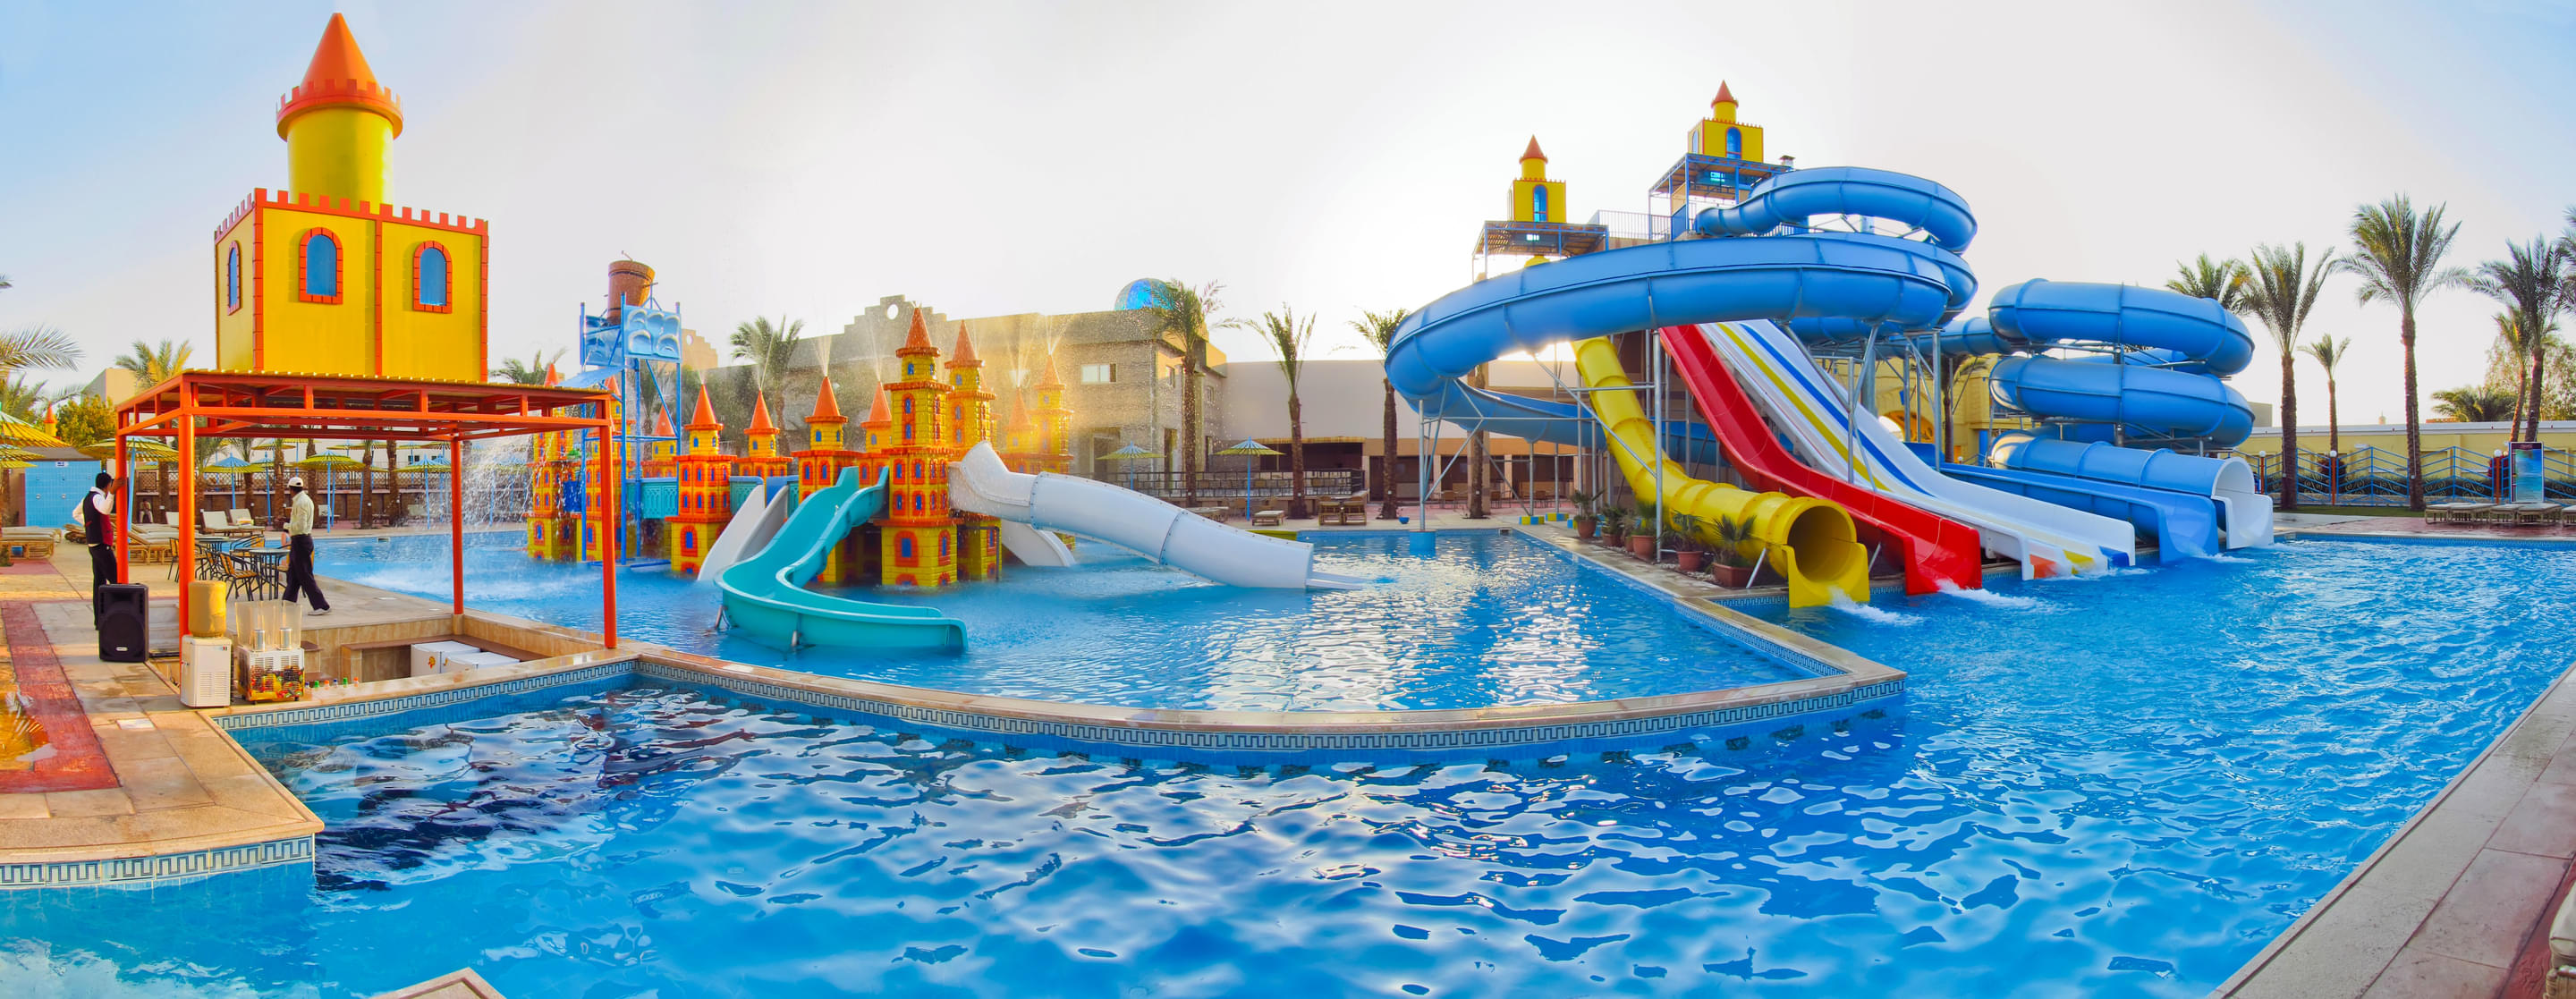 Best Water Parks in Indore